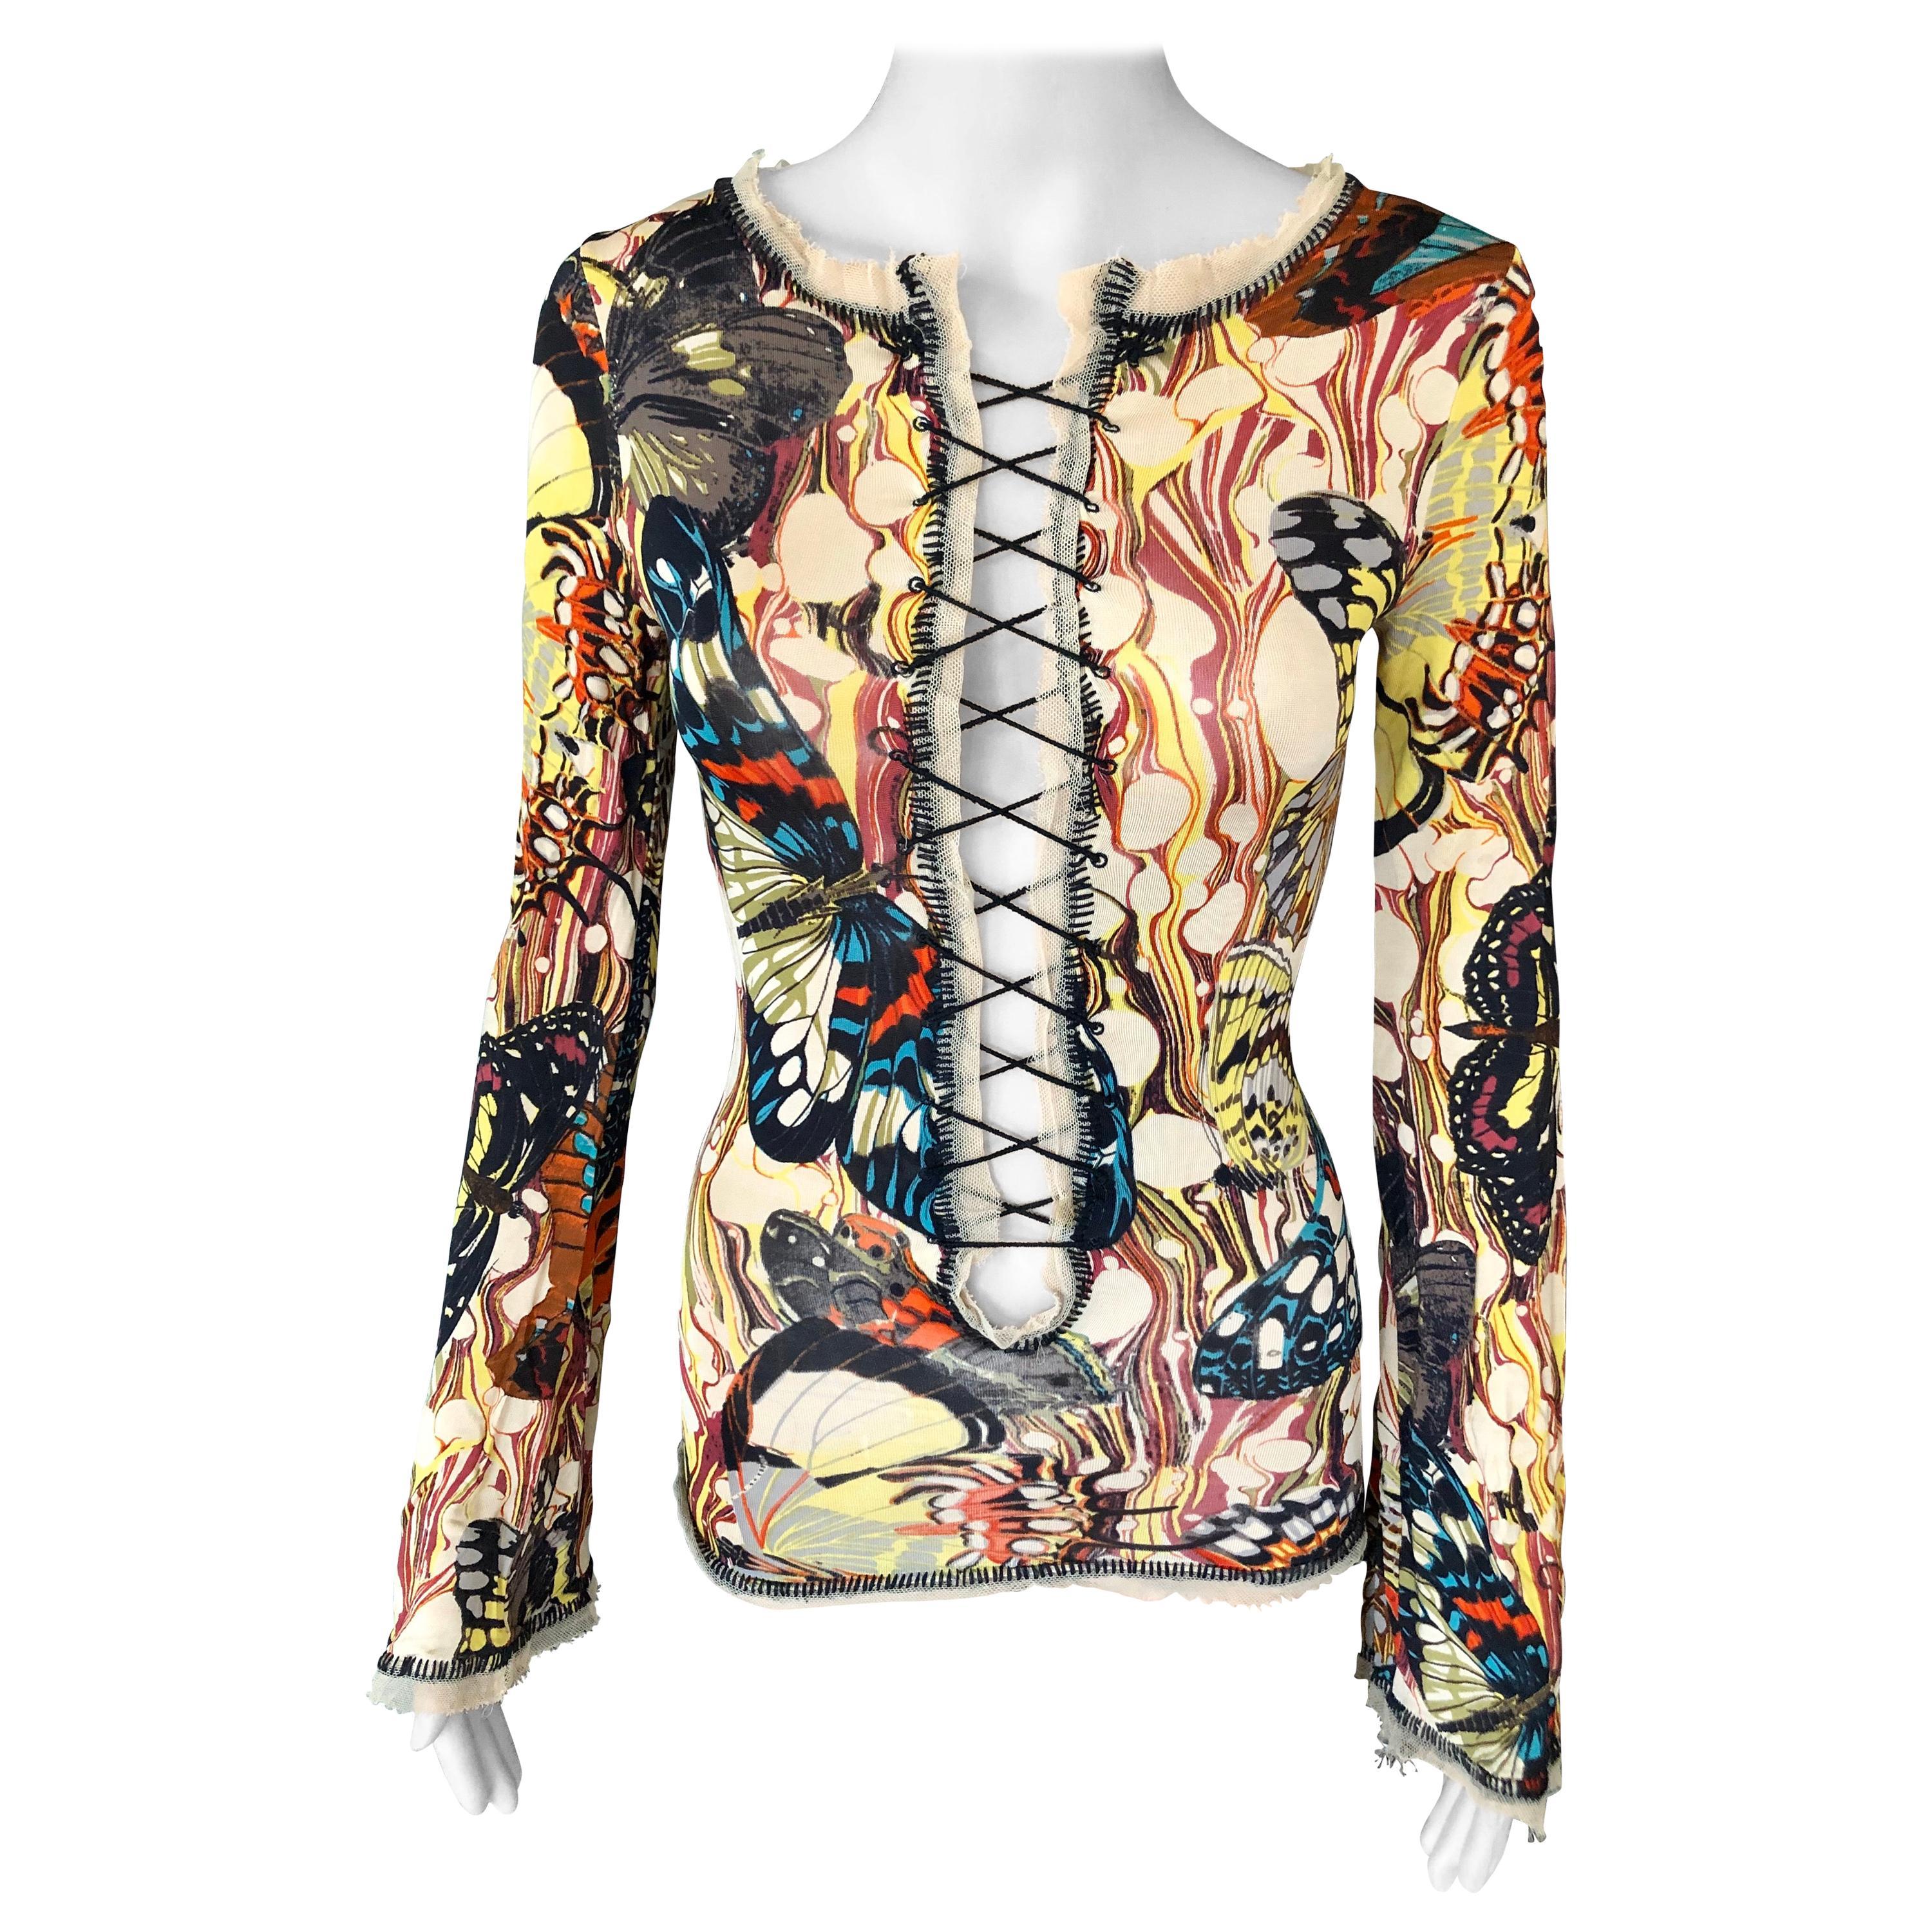 Jean Paul Gaultier Butterfly Corset Style Kendall Jenner Kardashian Optical Illusion Floral 2003 Vintage Psychedelic Top Mesh 

Iconic butterfly corset style top by Jean Paul Gaultier!
From the 2003 Spring Summer Collection!

One of the best Jean